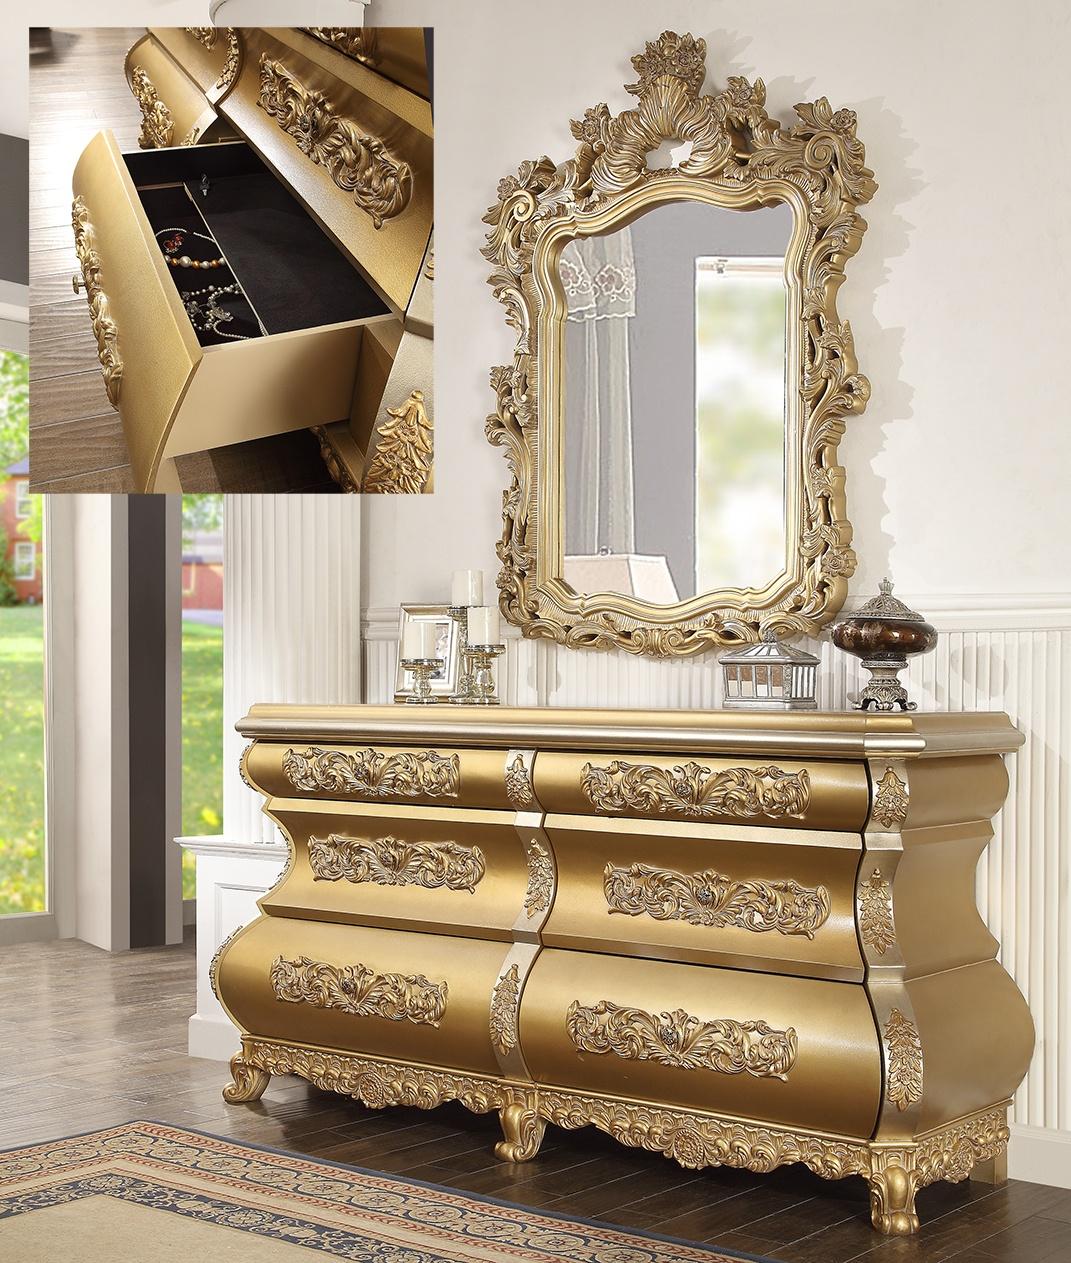 Classic, Traditional Server DN00454 DN00454 in Rich Gold, Gold Finish 